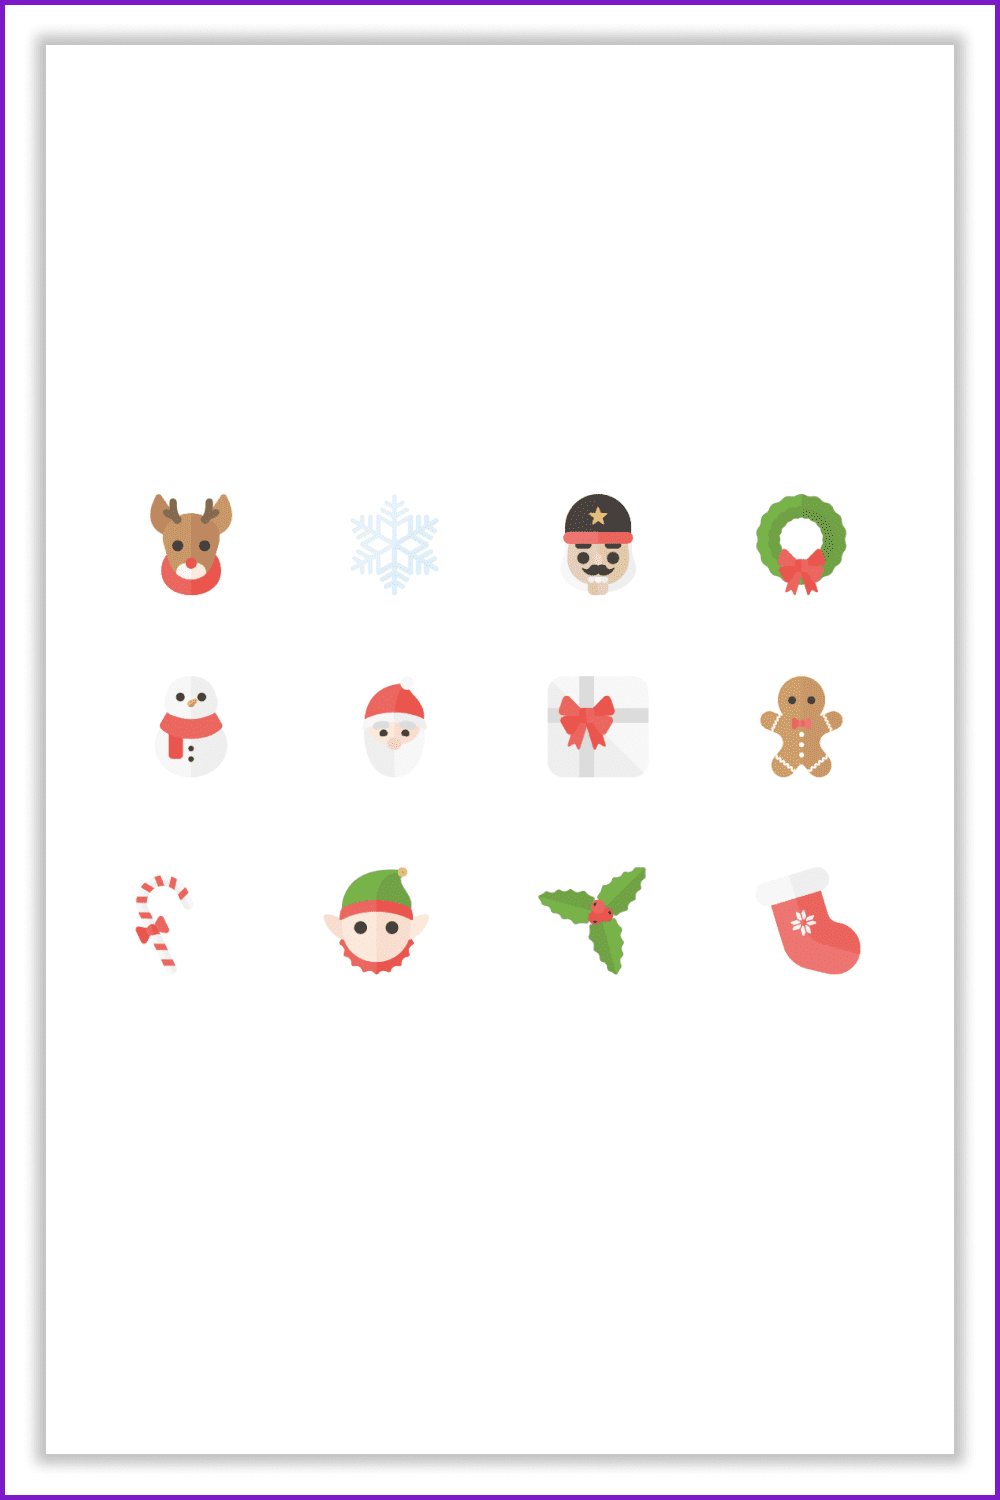 Collage of colored icons of elves, deer, Santa Claus and other Christmas characters.